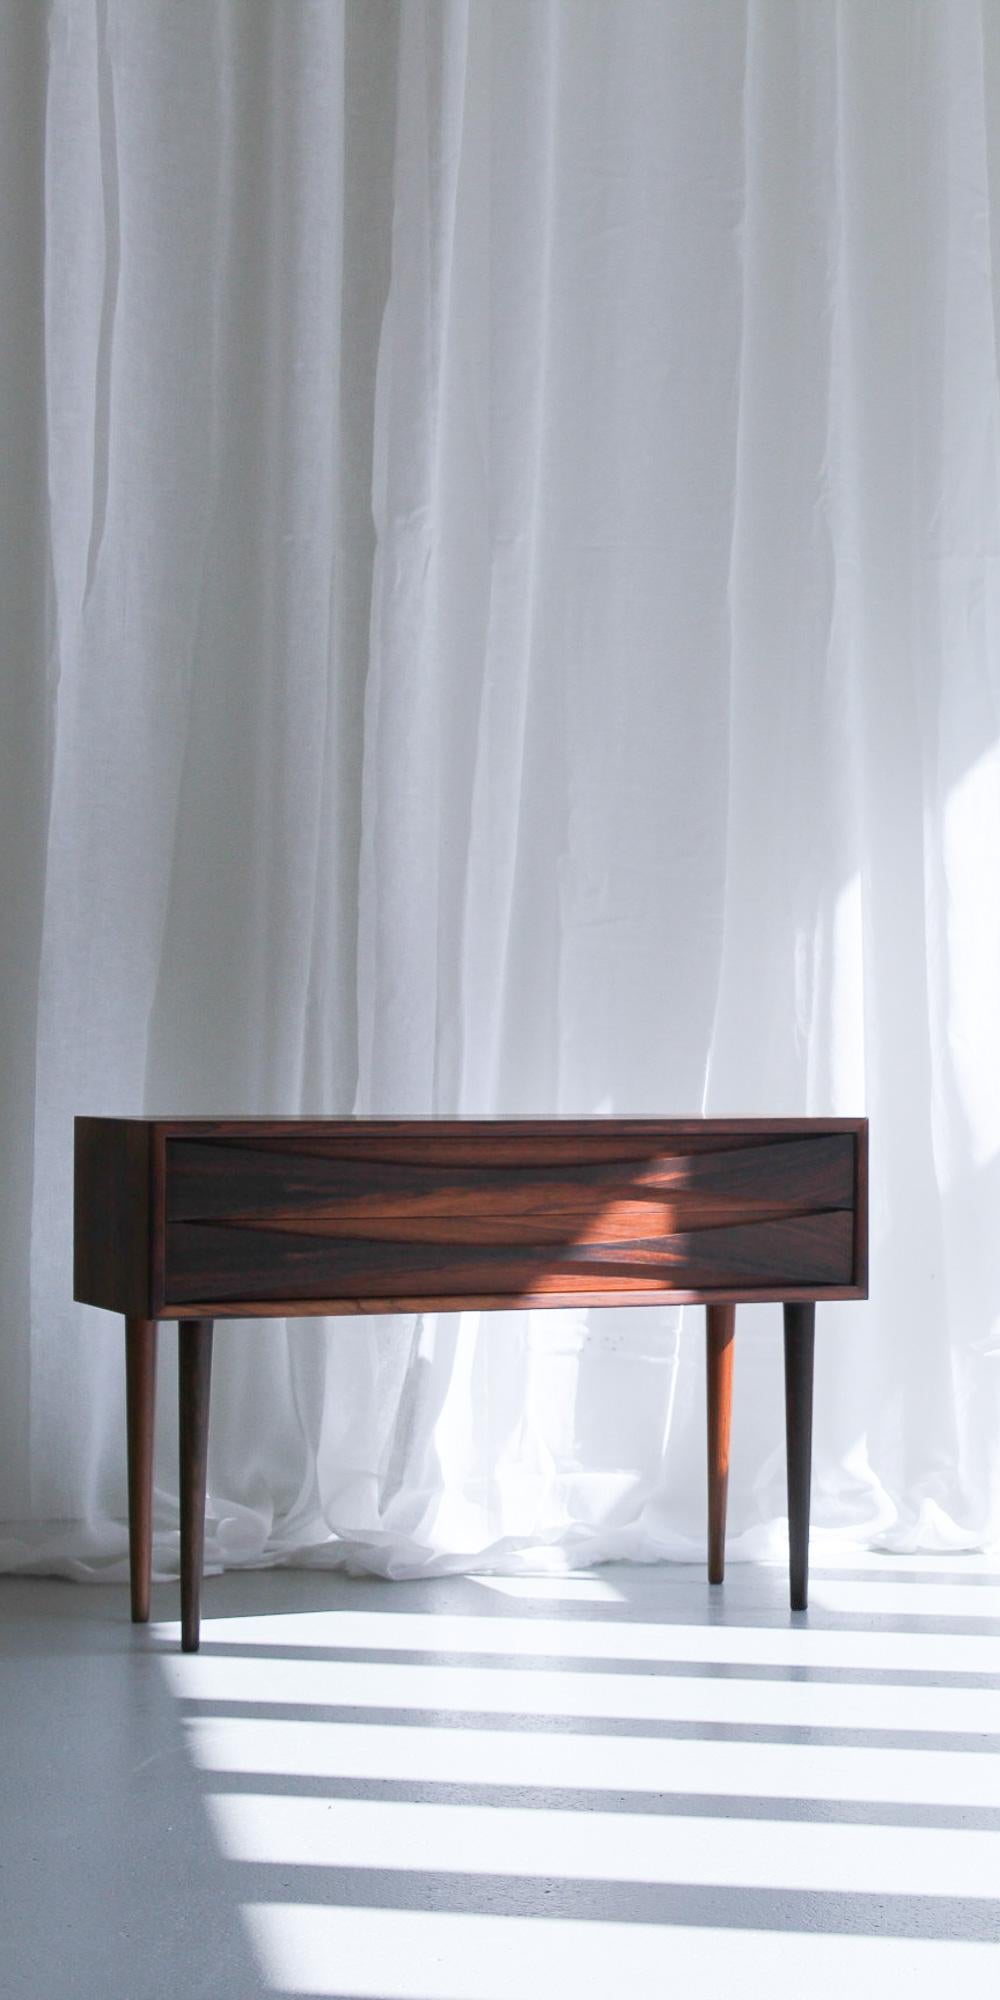 Danish Modern Rosewood Bedside Chest by Niels Clausen for NC Møbler, 1960s.
Scandinavian Mid-Century modern low and wide cabinet with two drawers by Niels Clausen for N.C. Møbler in Odense, Denmark.
Scalloped pulls in the entire width of the